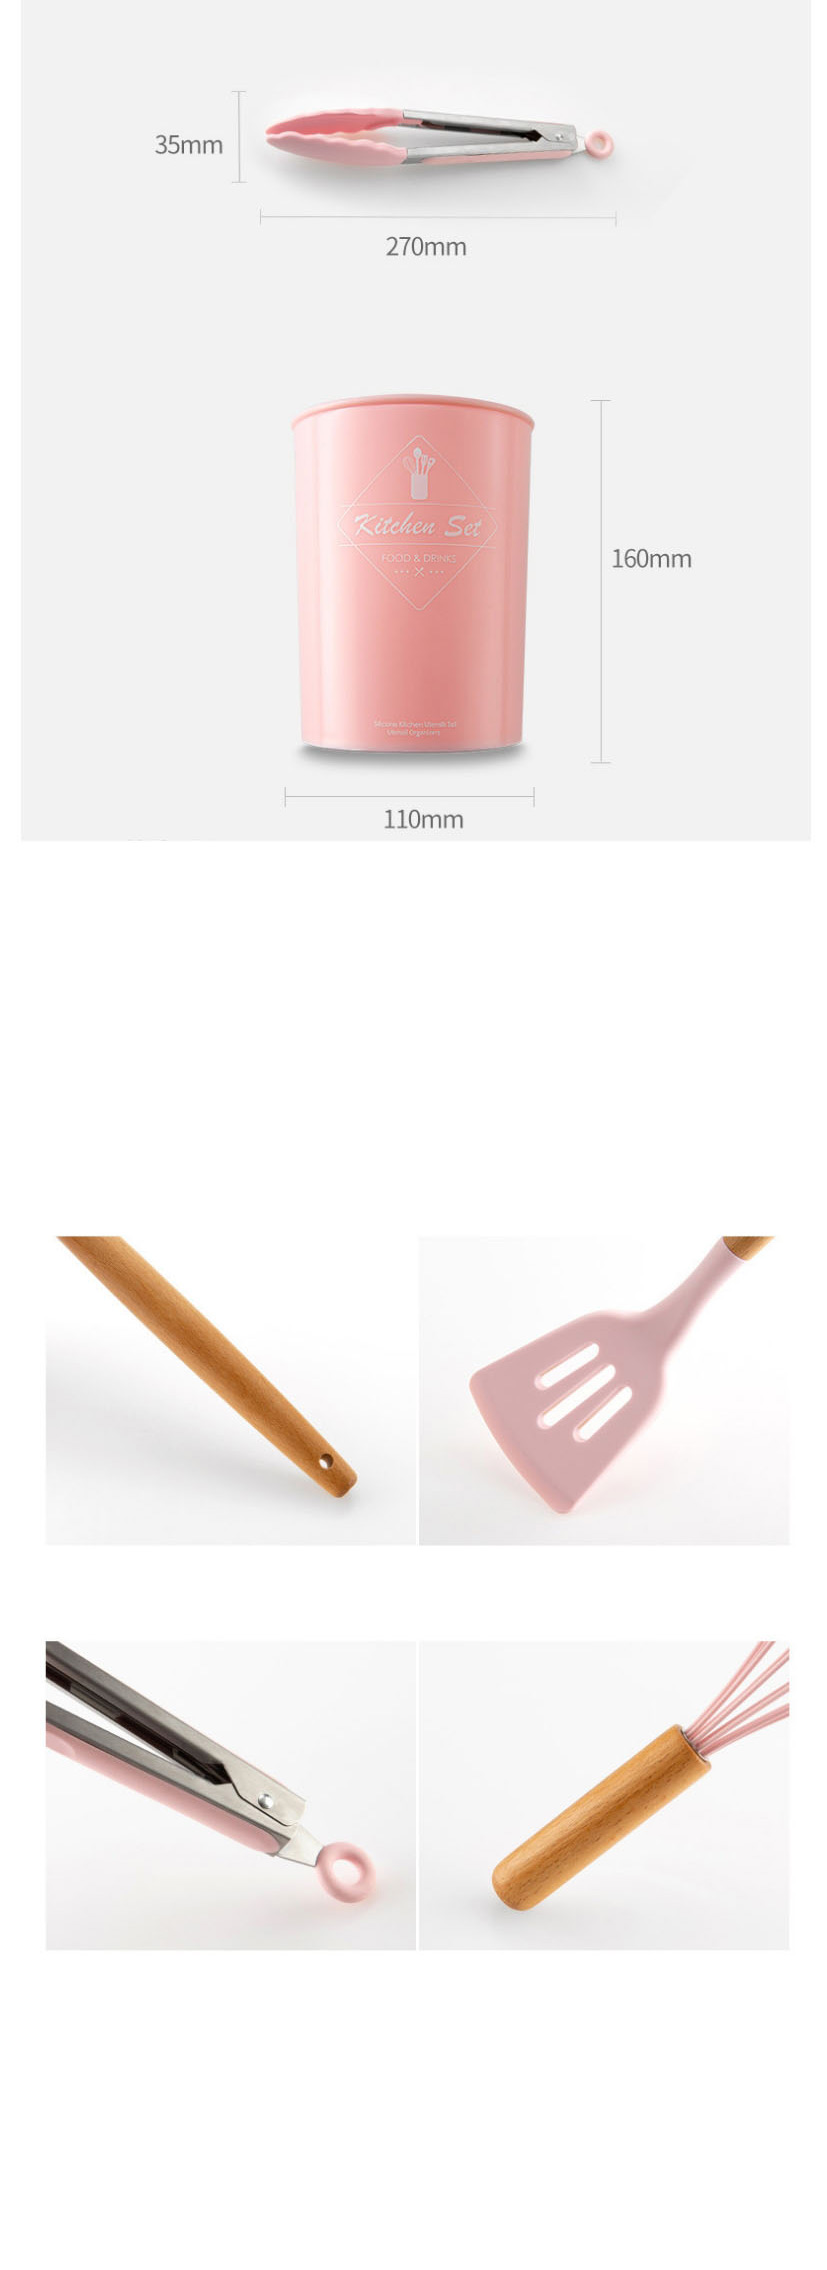 Fashion Small Soup Spoon Pink Solid Wood Handle With Bucket And Silica Gel Kitchenware,Kitchen